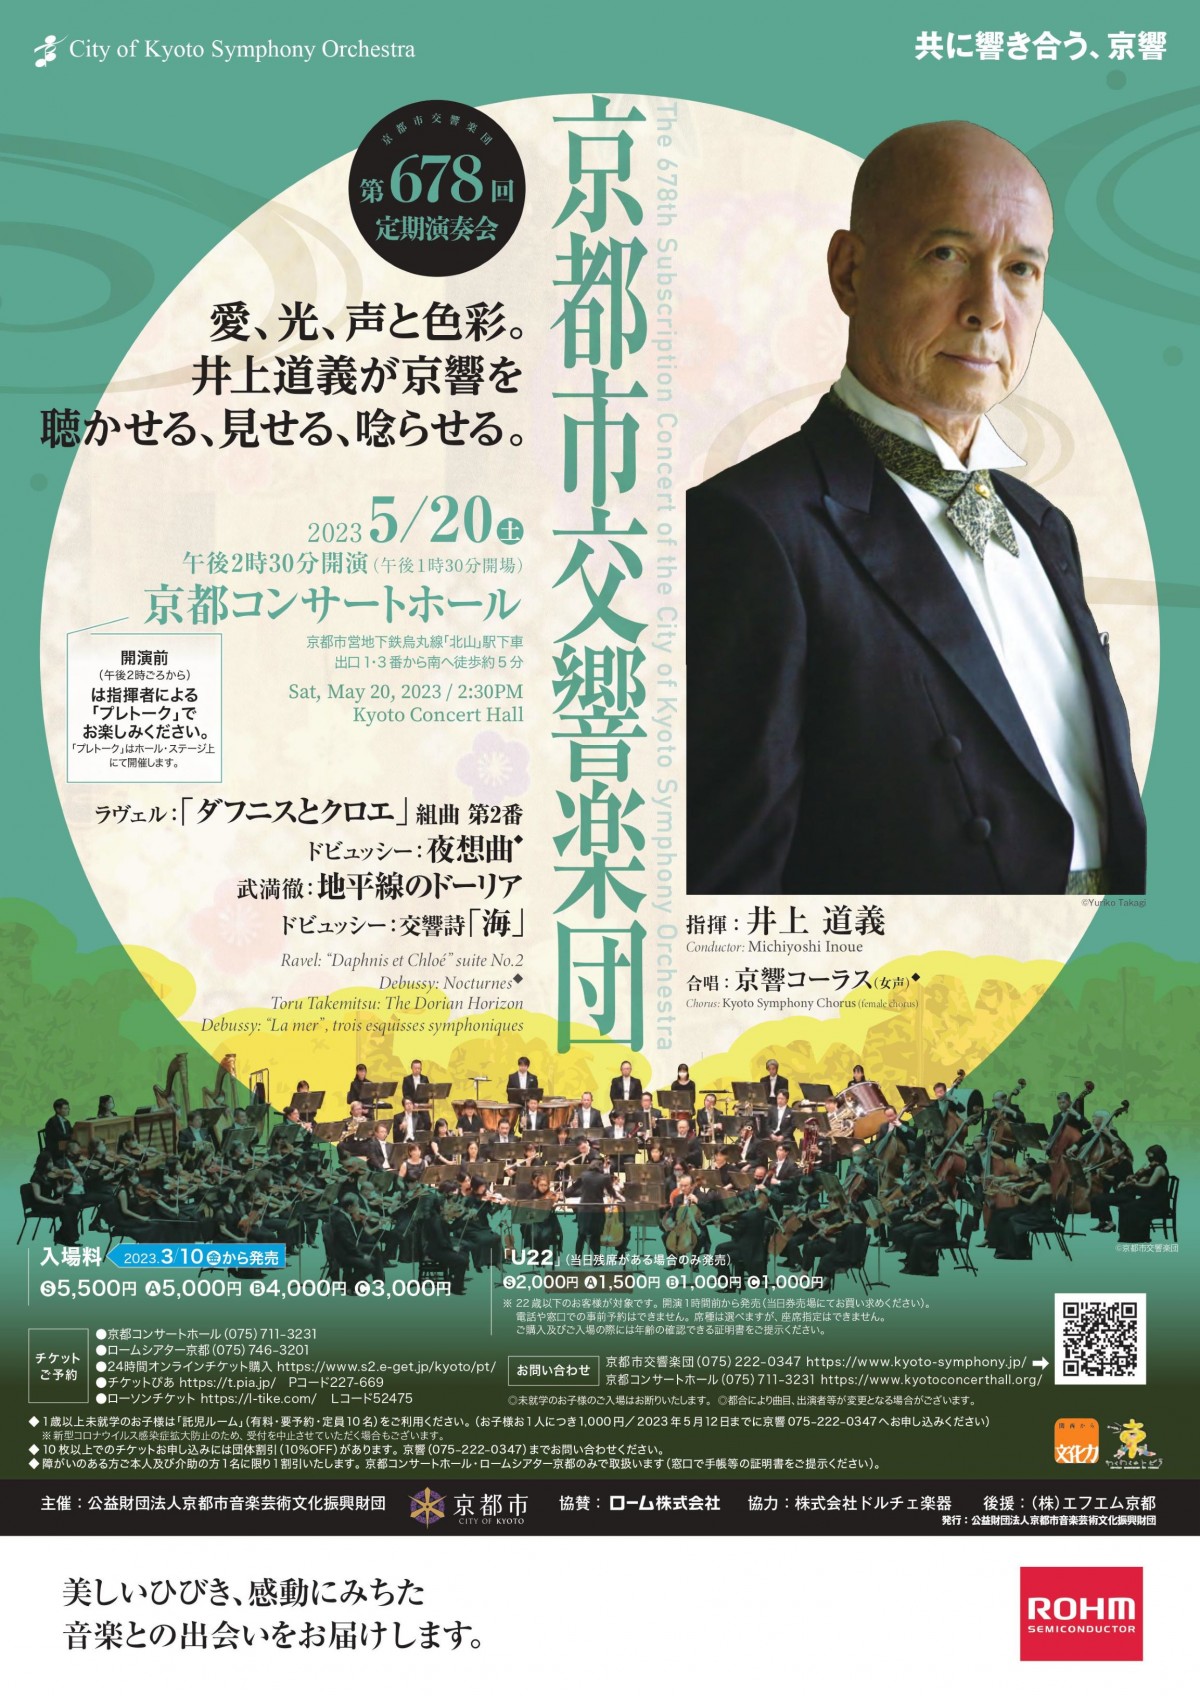 ＜SOLD OUT !＞
The 678th Subscription Concert